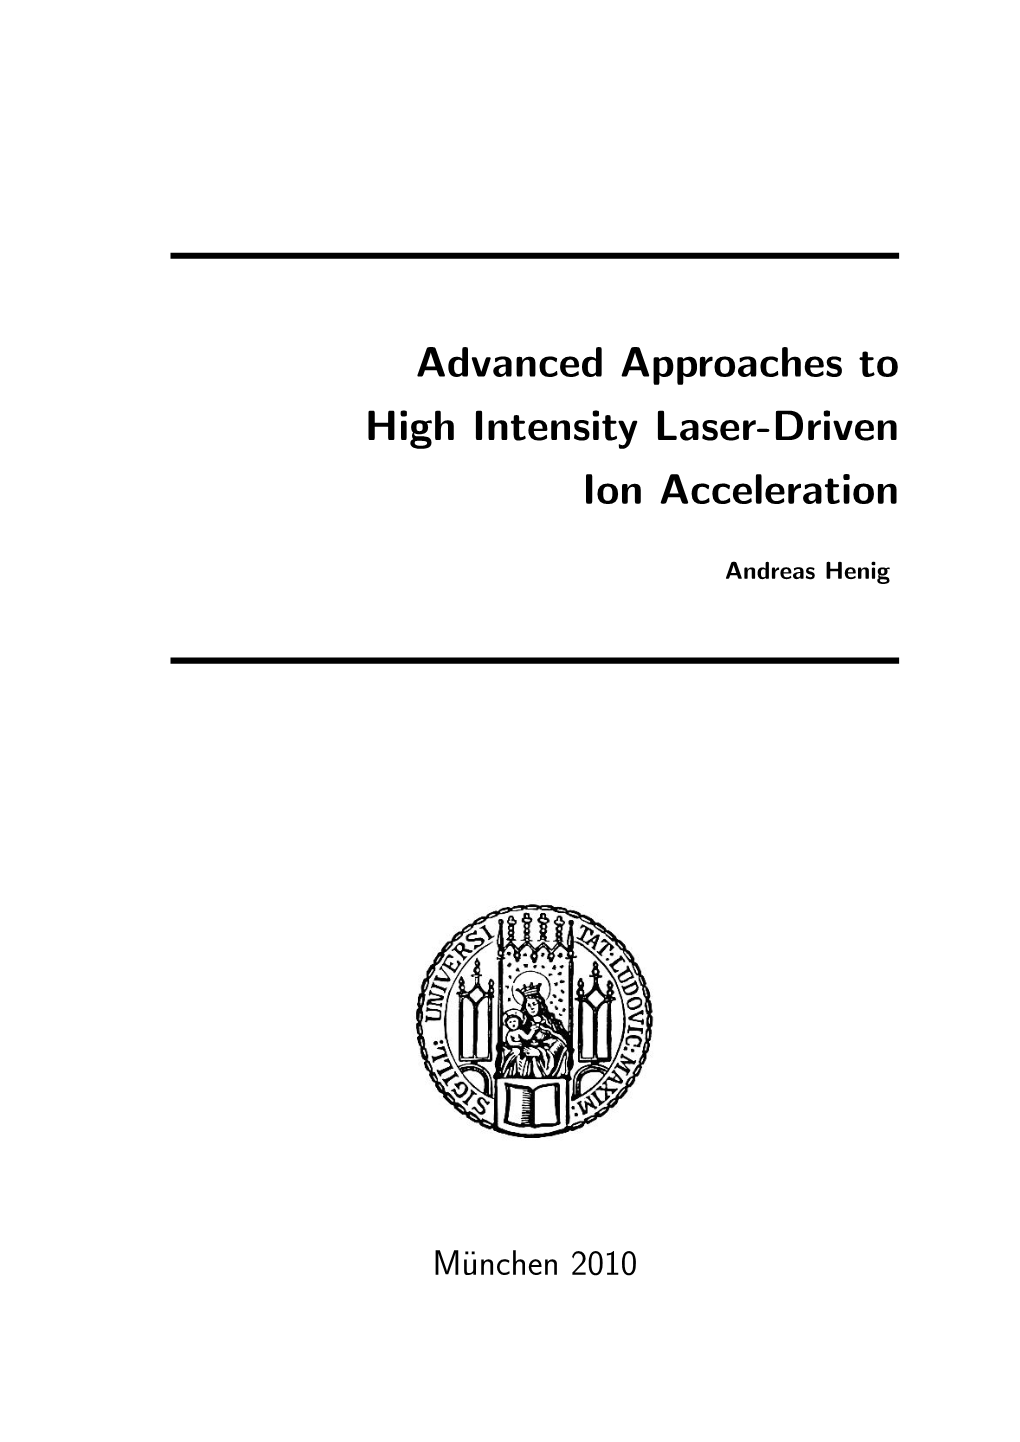 Advanced Approaches to High Intensity Laser-Driven Ion Acceleration